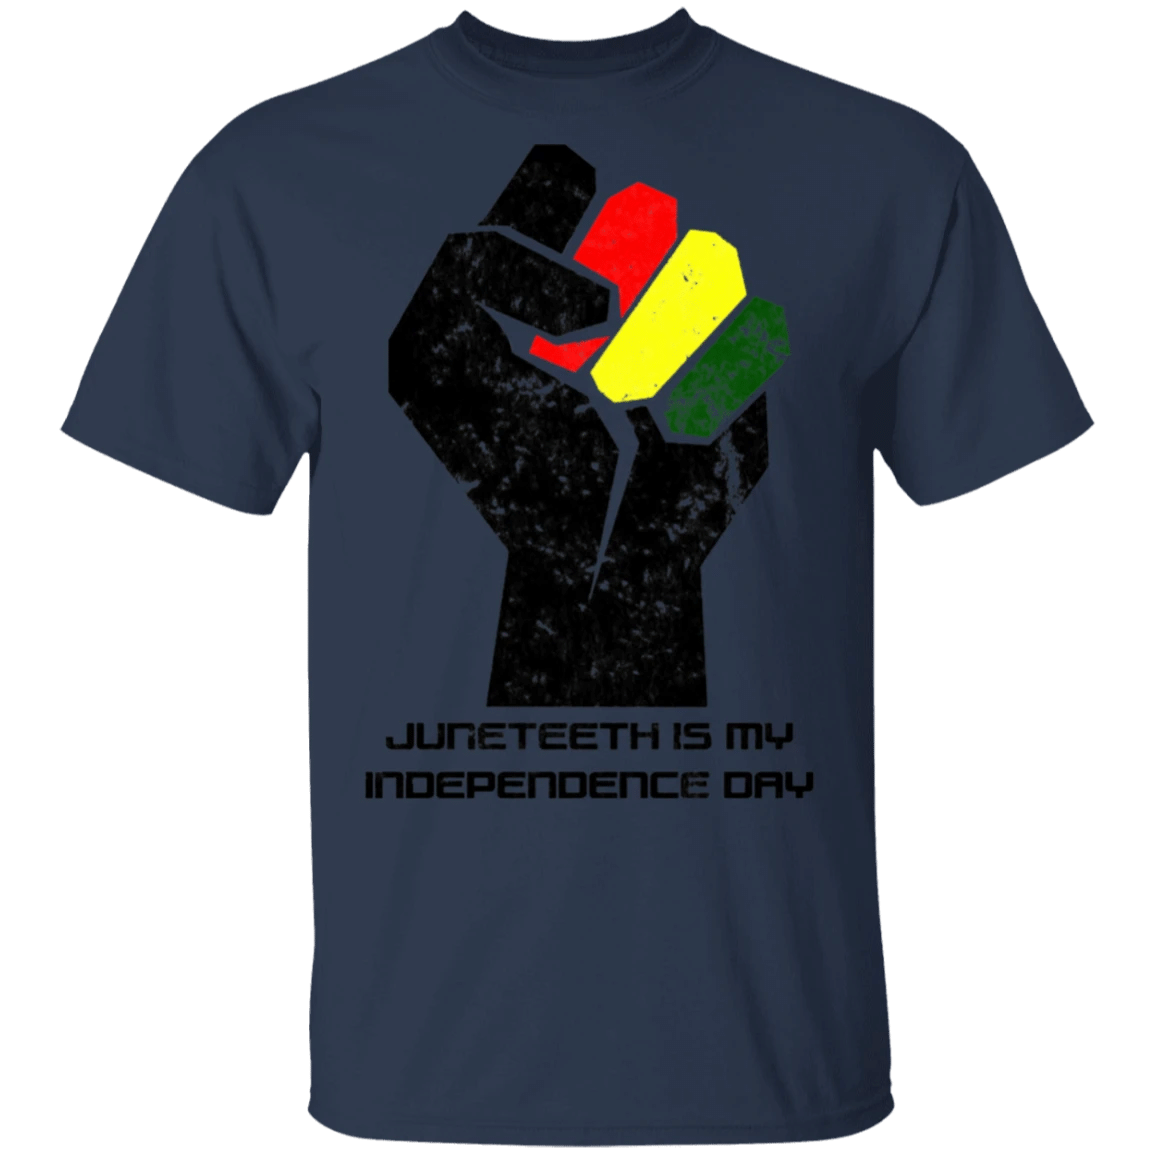 Juneteenth Is My Independence Day Shirt Blm George Floyd Shirt Idea